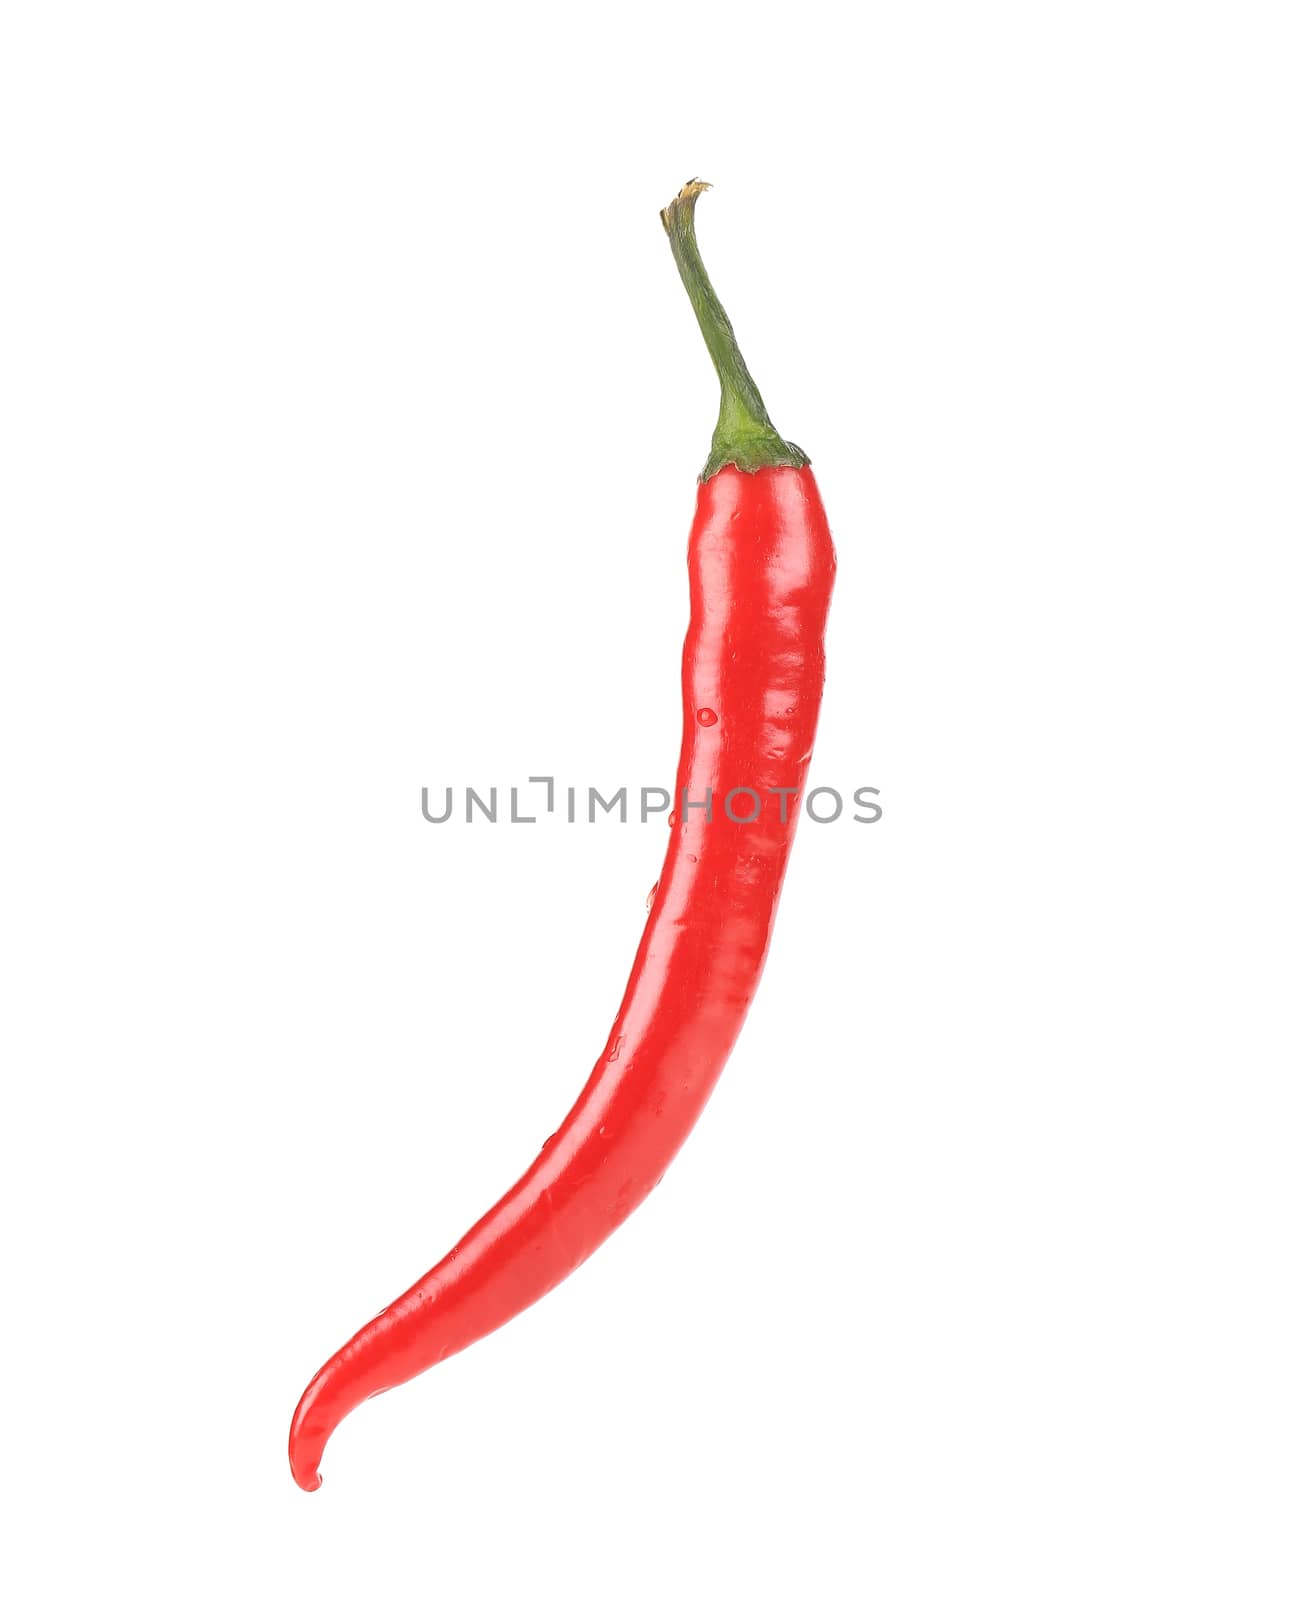 Red chili pepper. by indigolotos